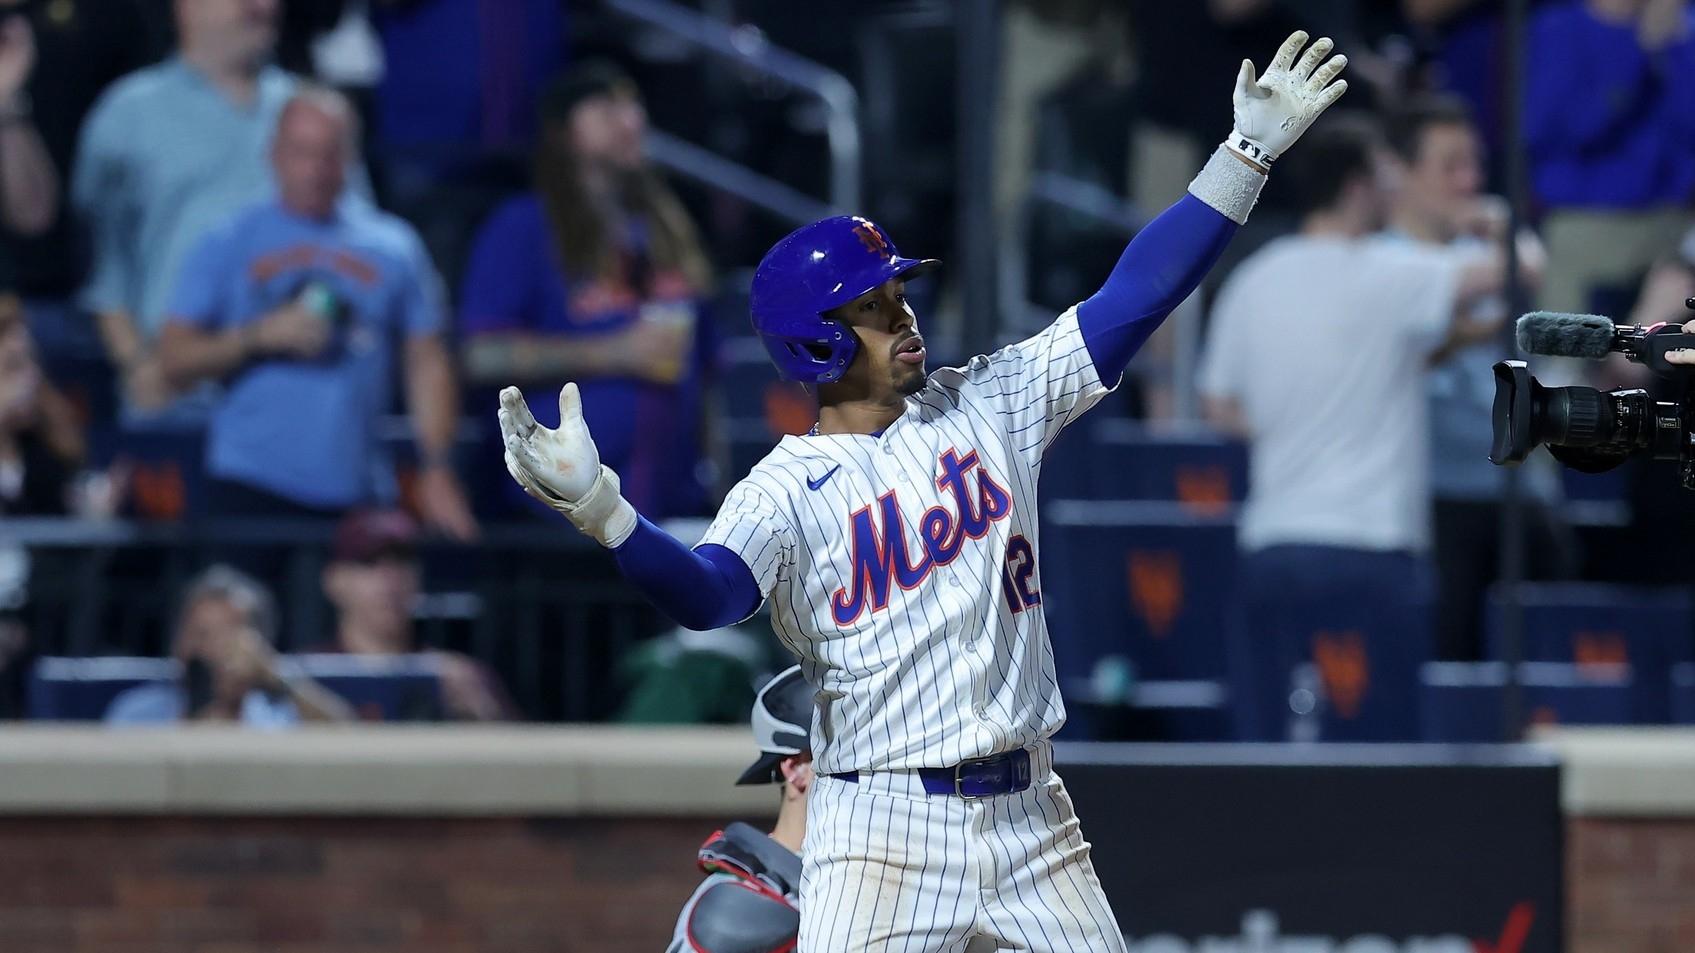 Mets offense now producing what was ‘envisioned’ ahead of season